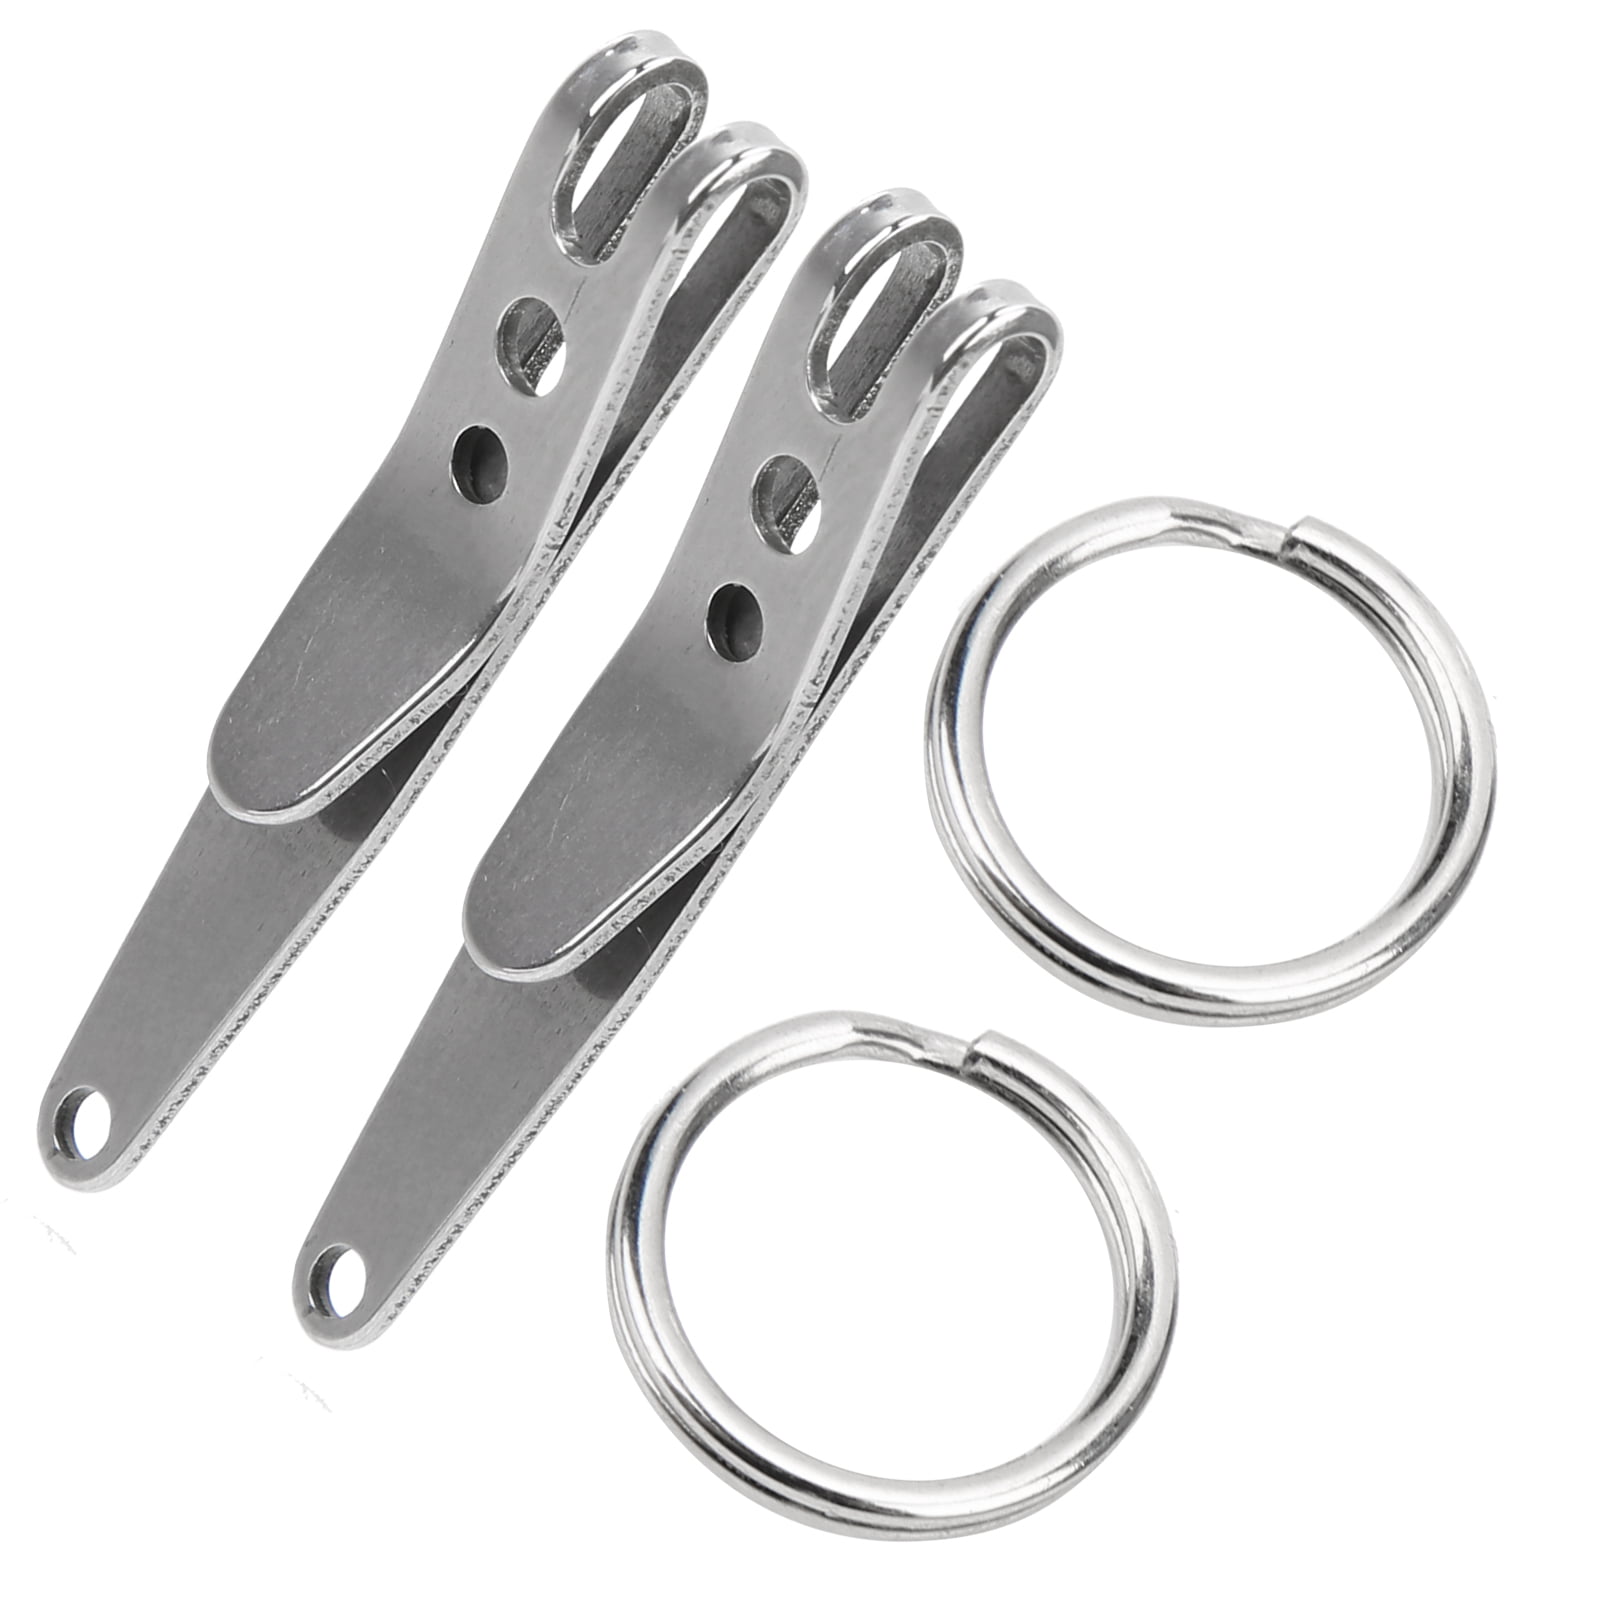 2Pcs Outdoor Belt Clip Stainless Suspension Pocket Clip Key Holder With Keychain 